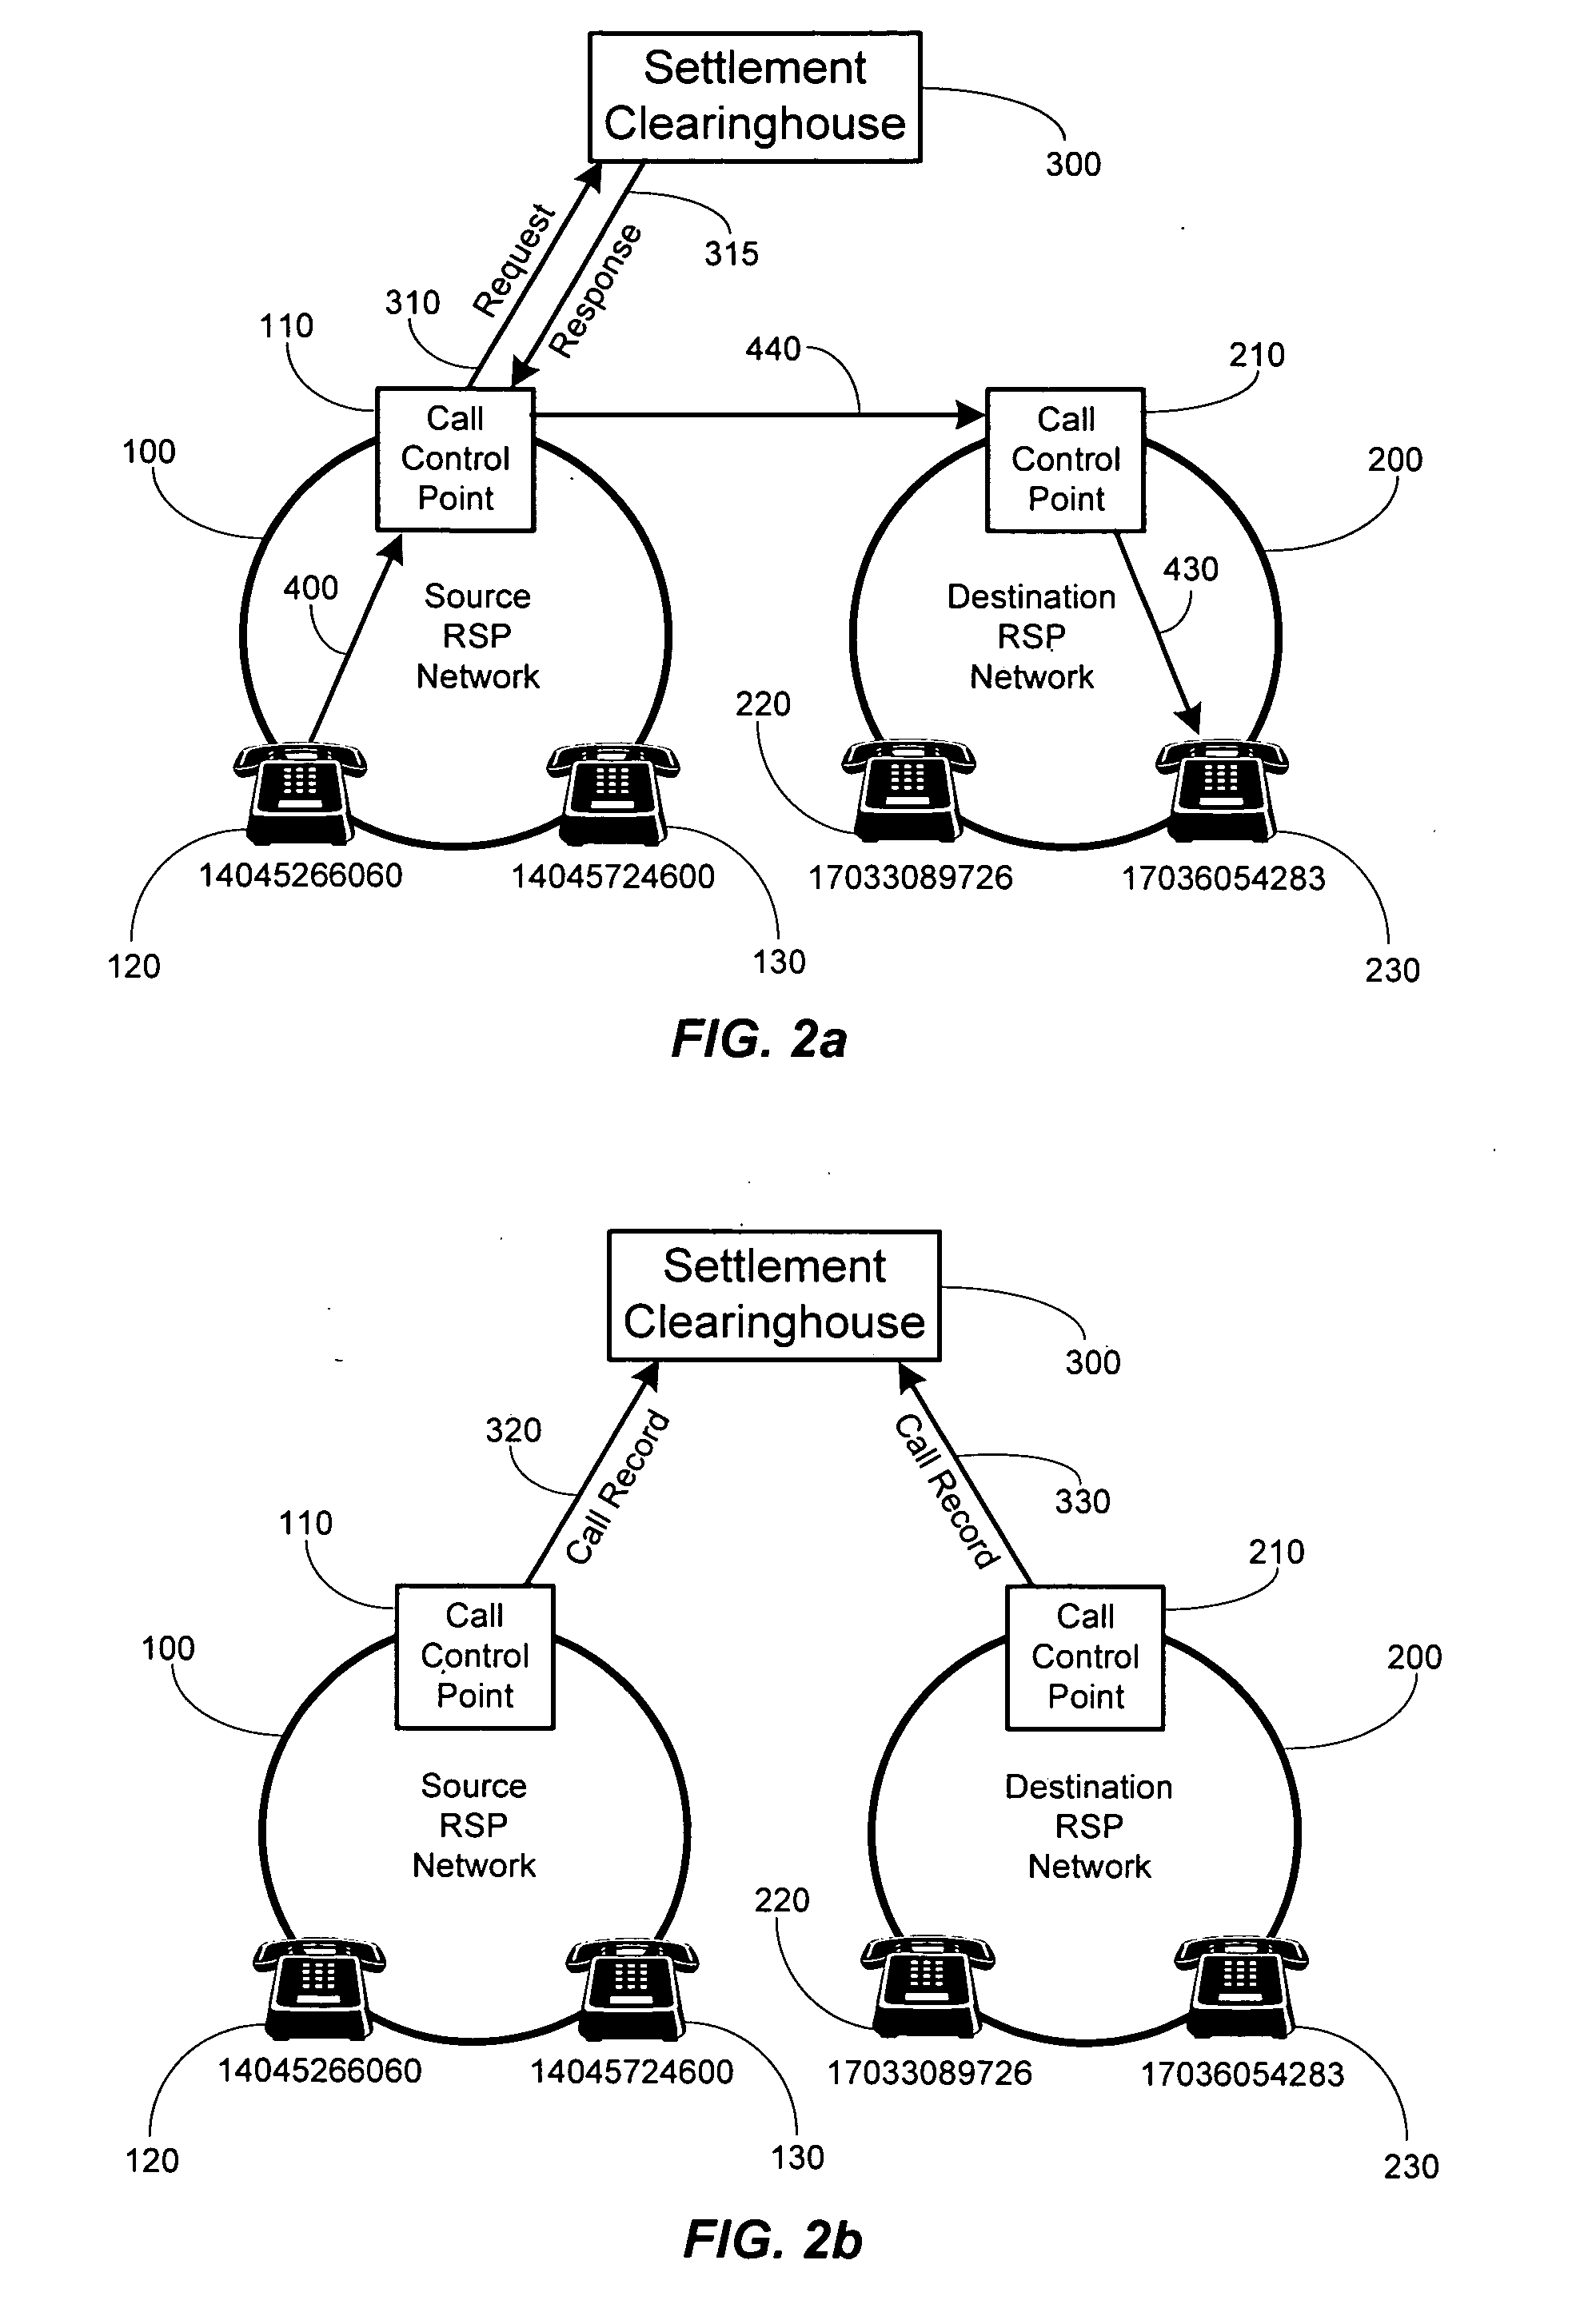 Method and system for securely authorized VoIP Interconnections between anonymous peers of VoIP networks